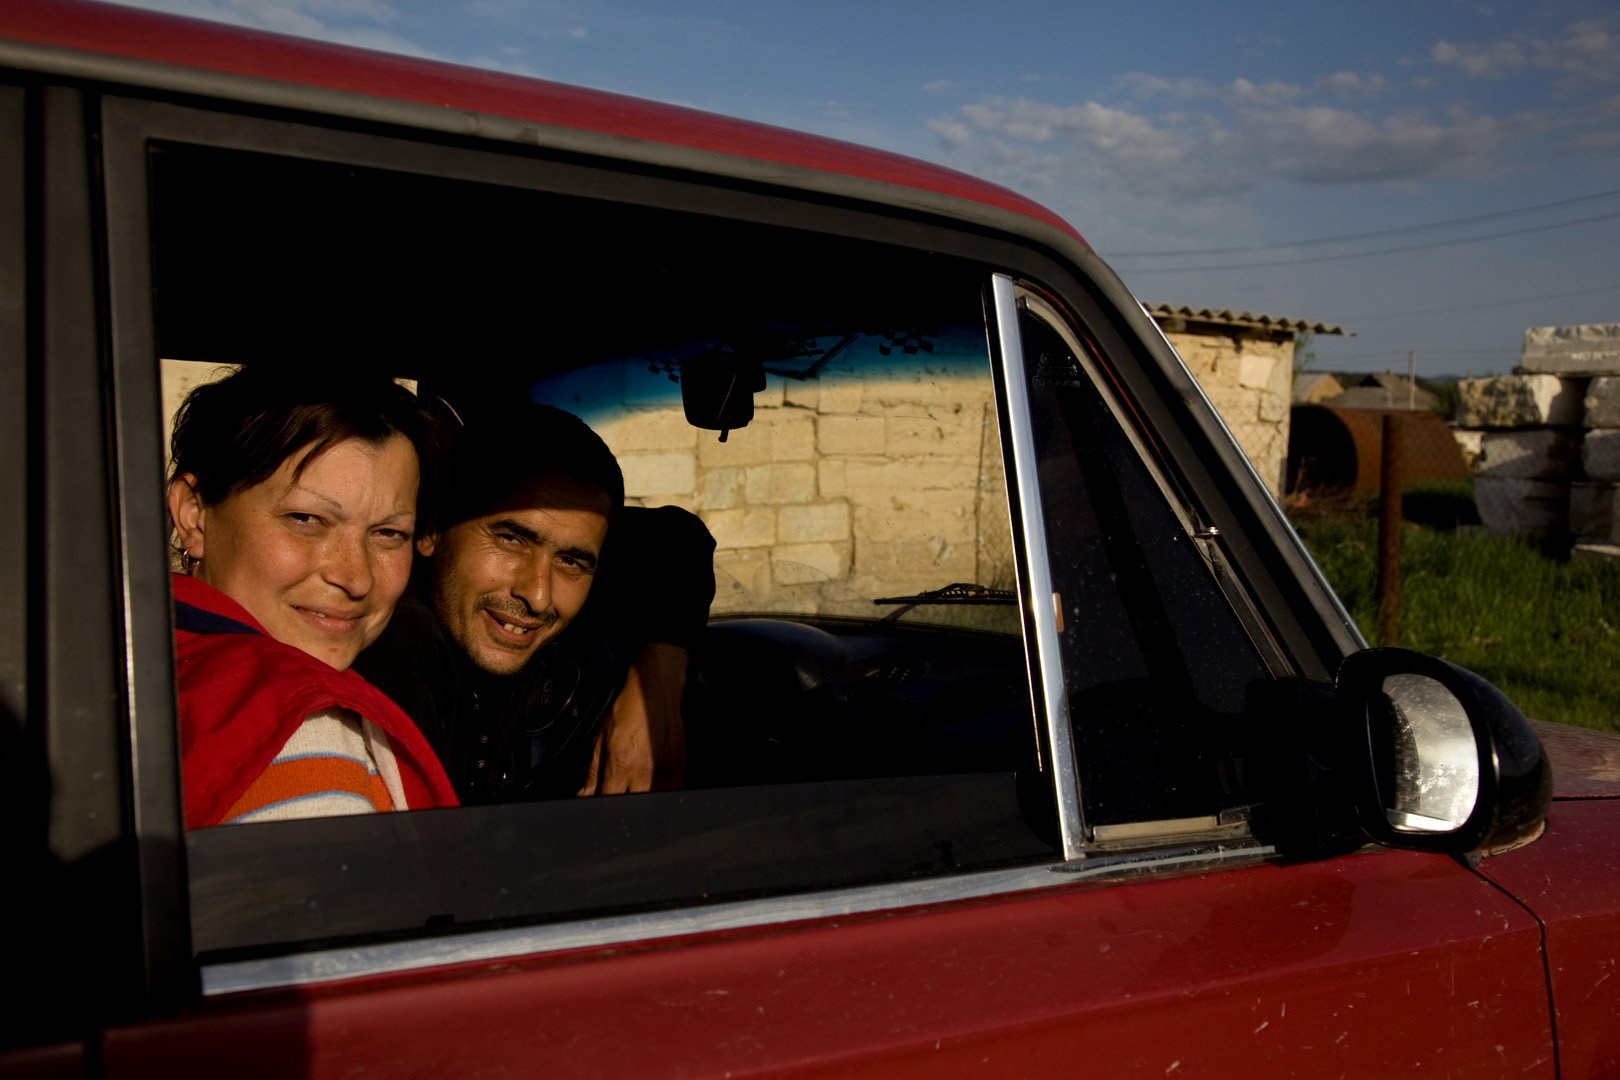  Behind this young Tatar couple are the new settlements in Sarysu, where the Tatar community has resorted to building temporary structures on state land in an attempt to reclaim ownership.  Sarysu, Crimea  